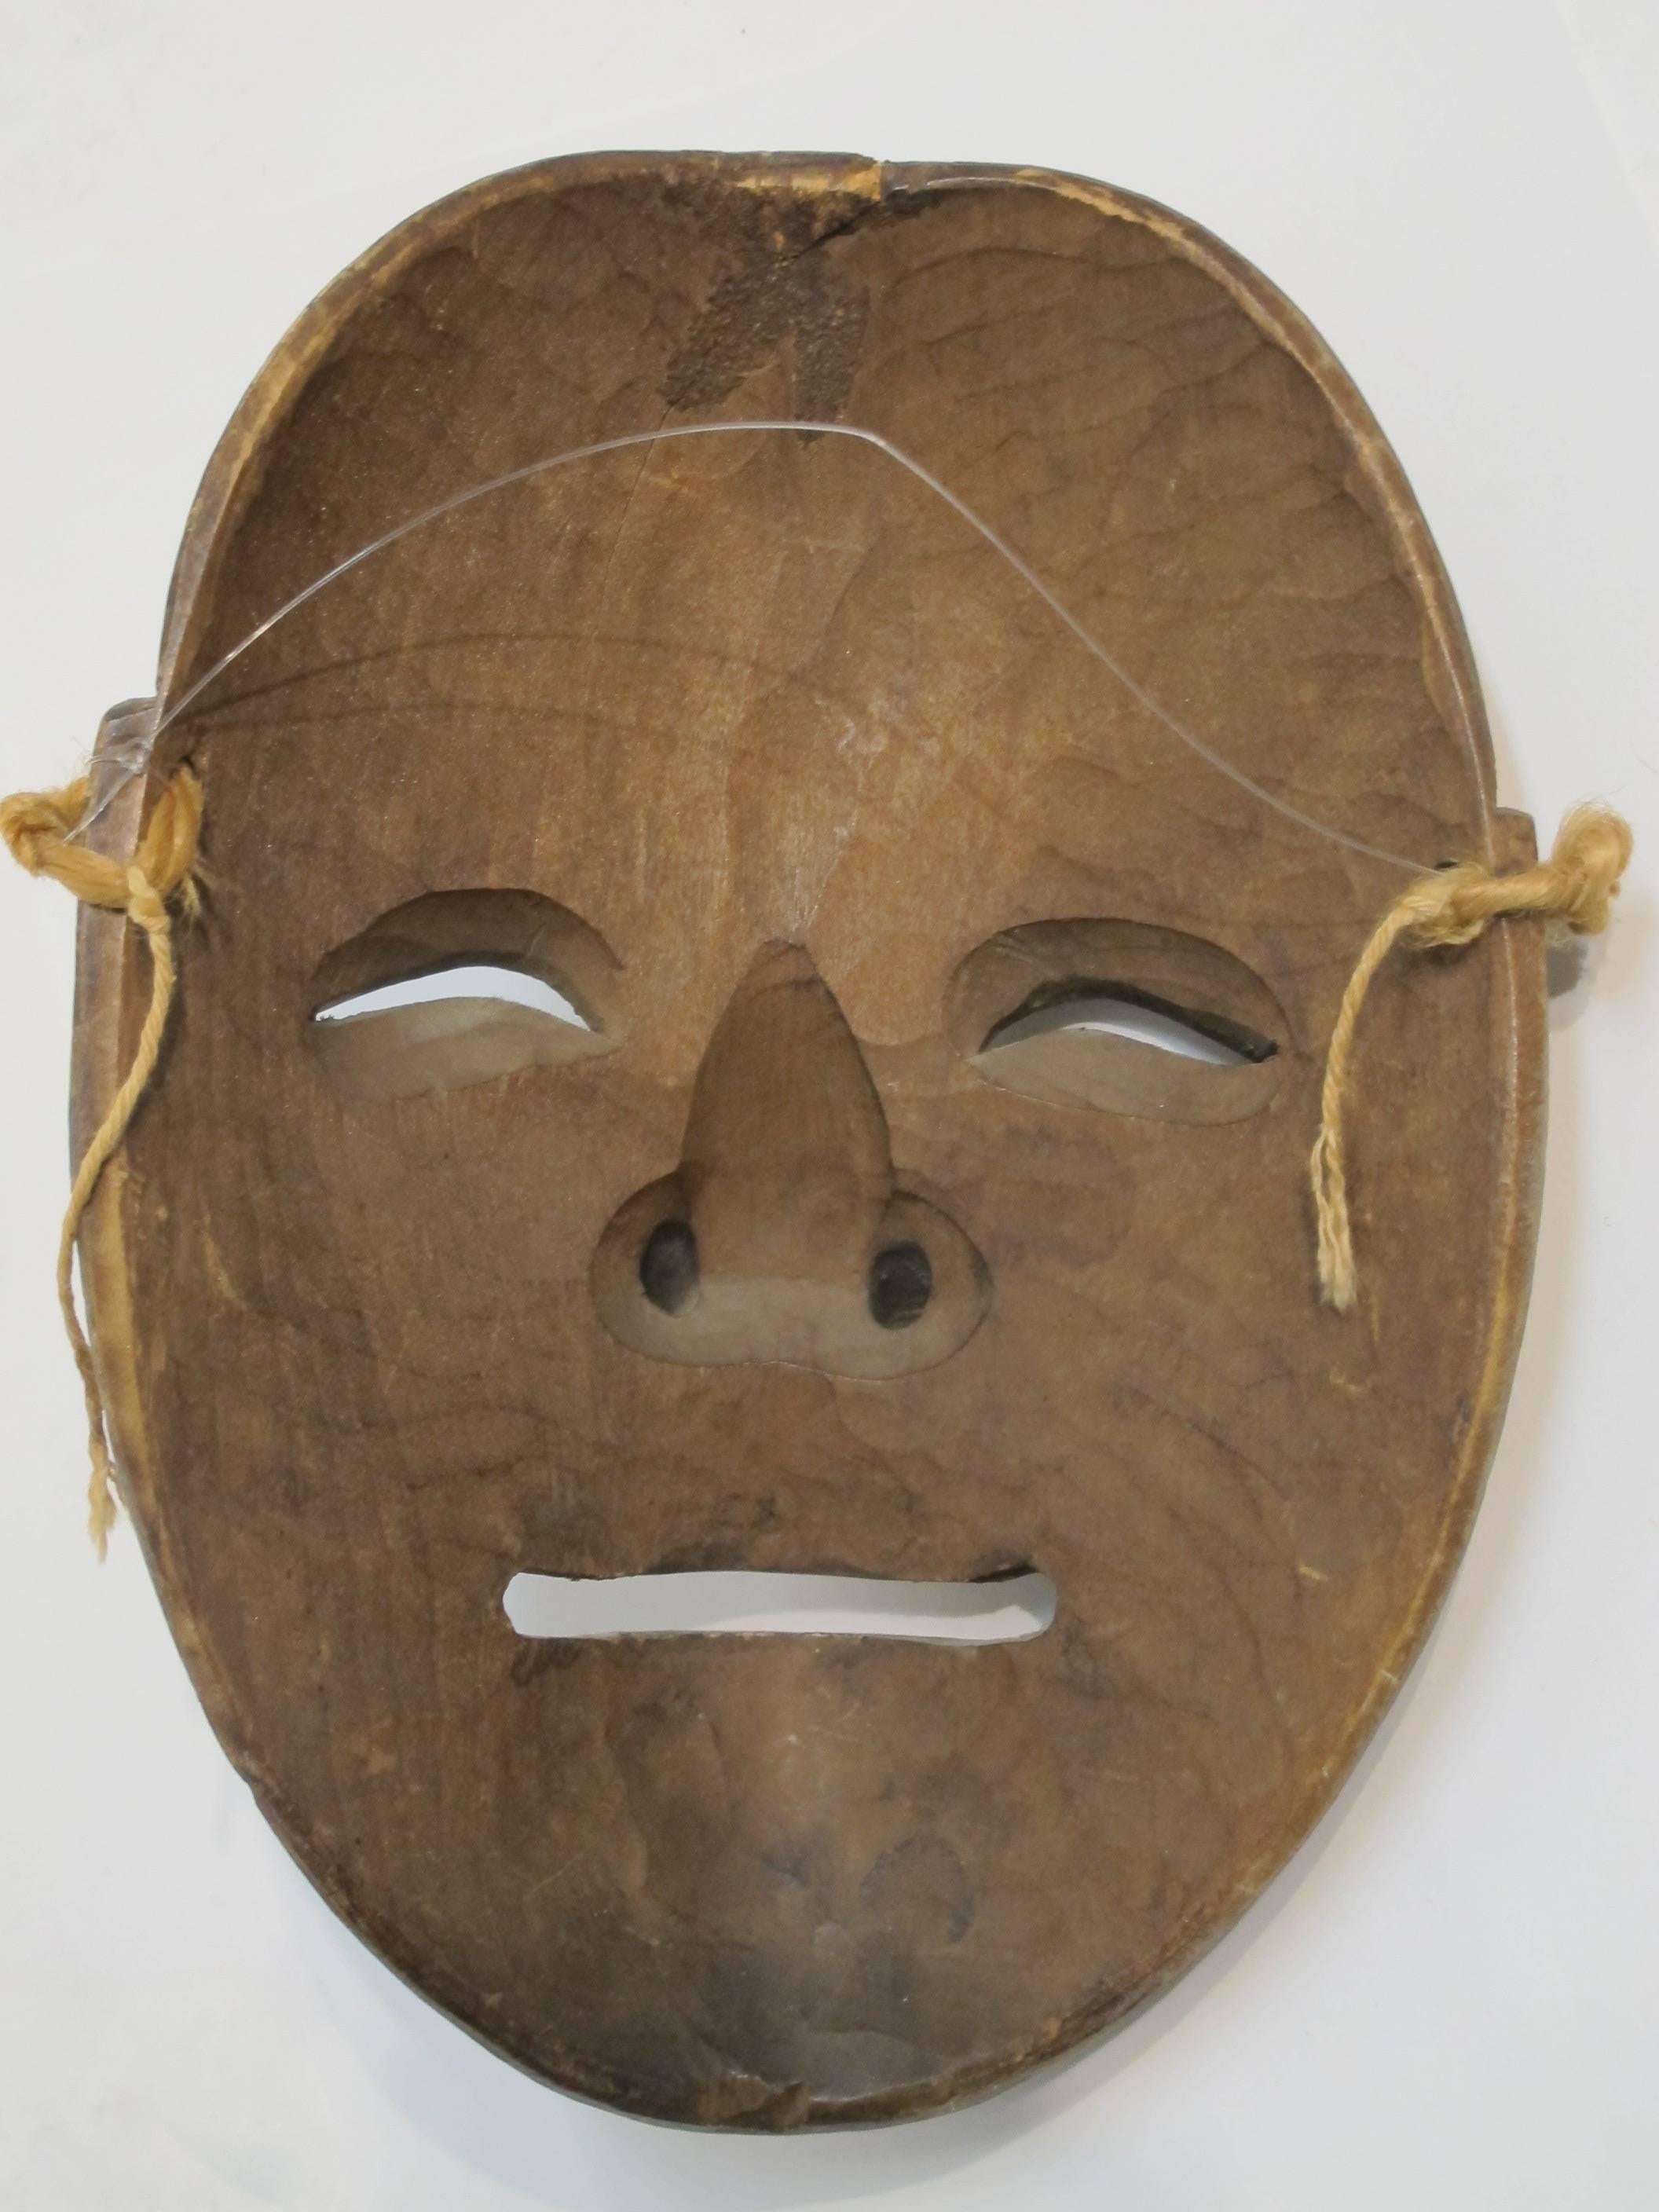 A very realistic carved wood Japanese theater mask with original painted finish.